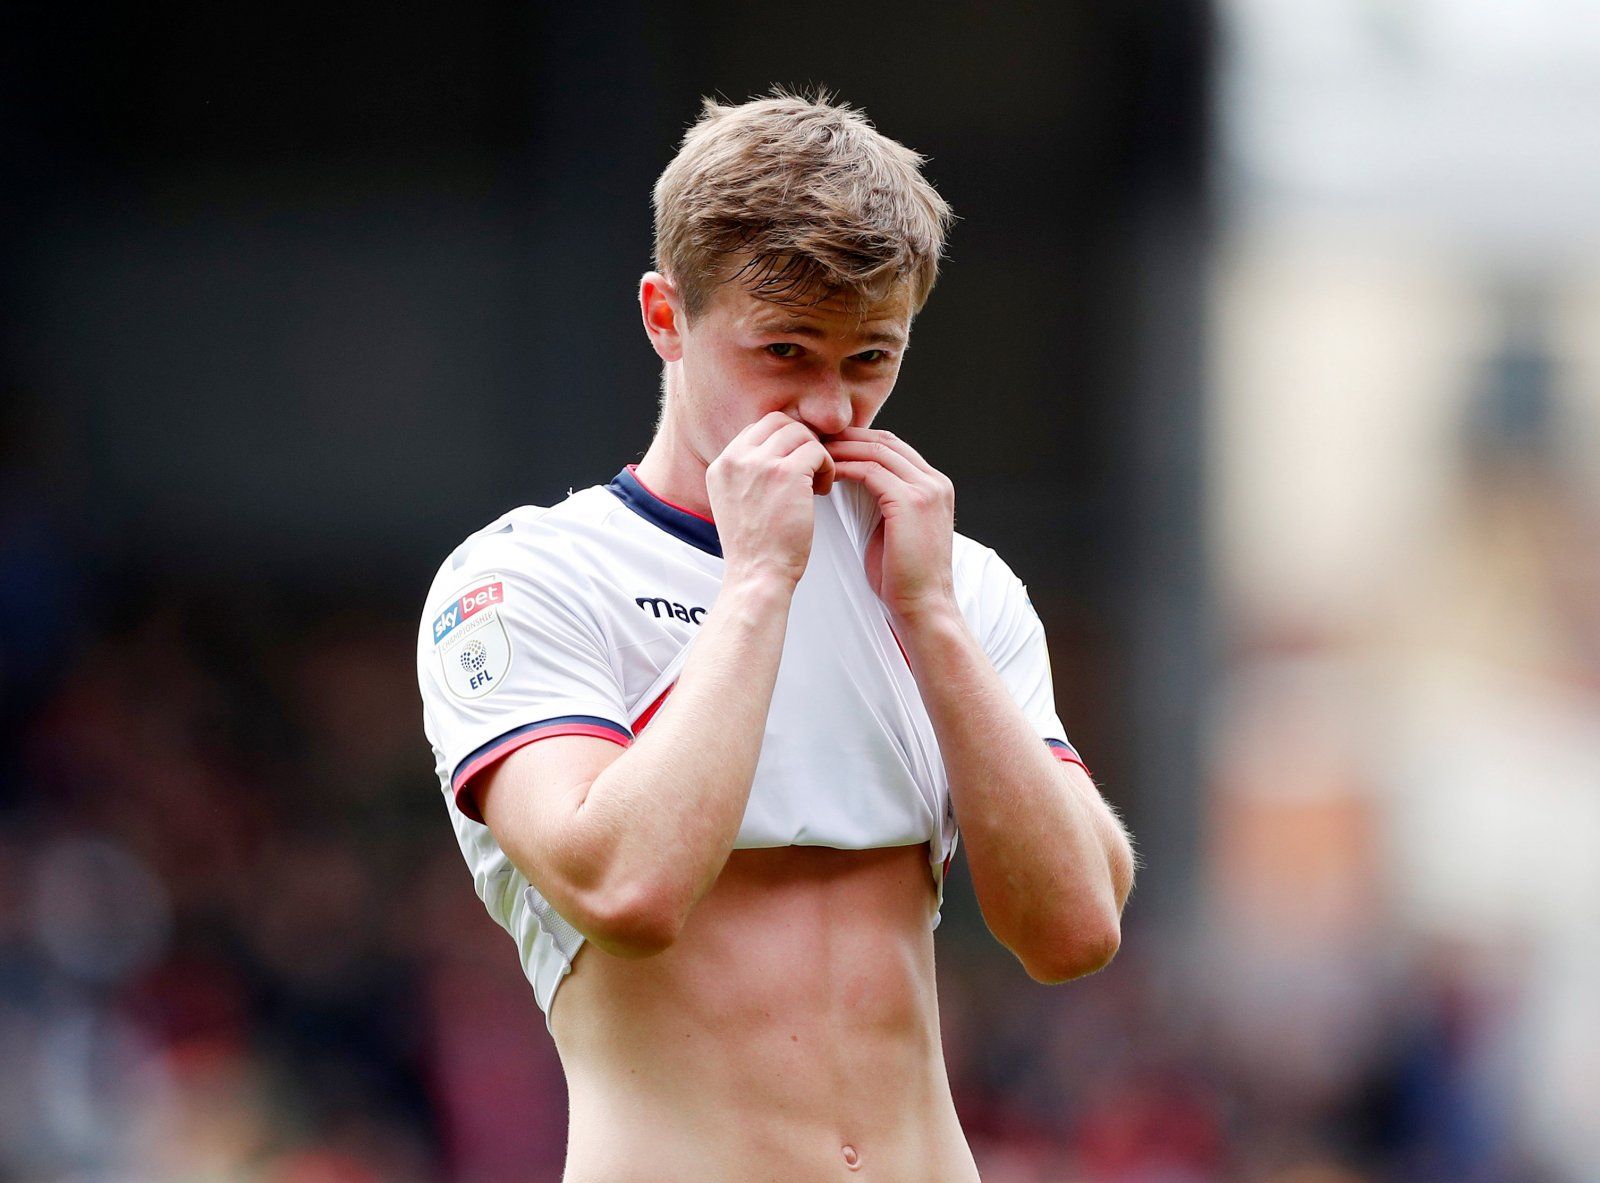 Everton-owned Callum Connolly looks dejected at the end of the Bolton Wanderers, Nottingham Forest match, May 2019